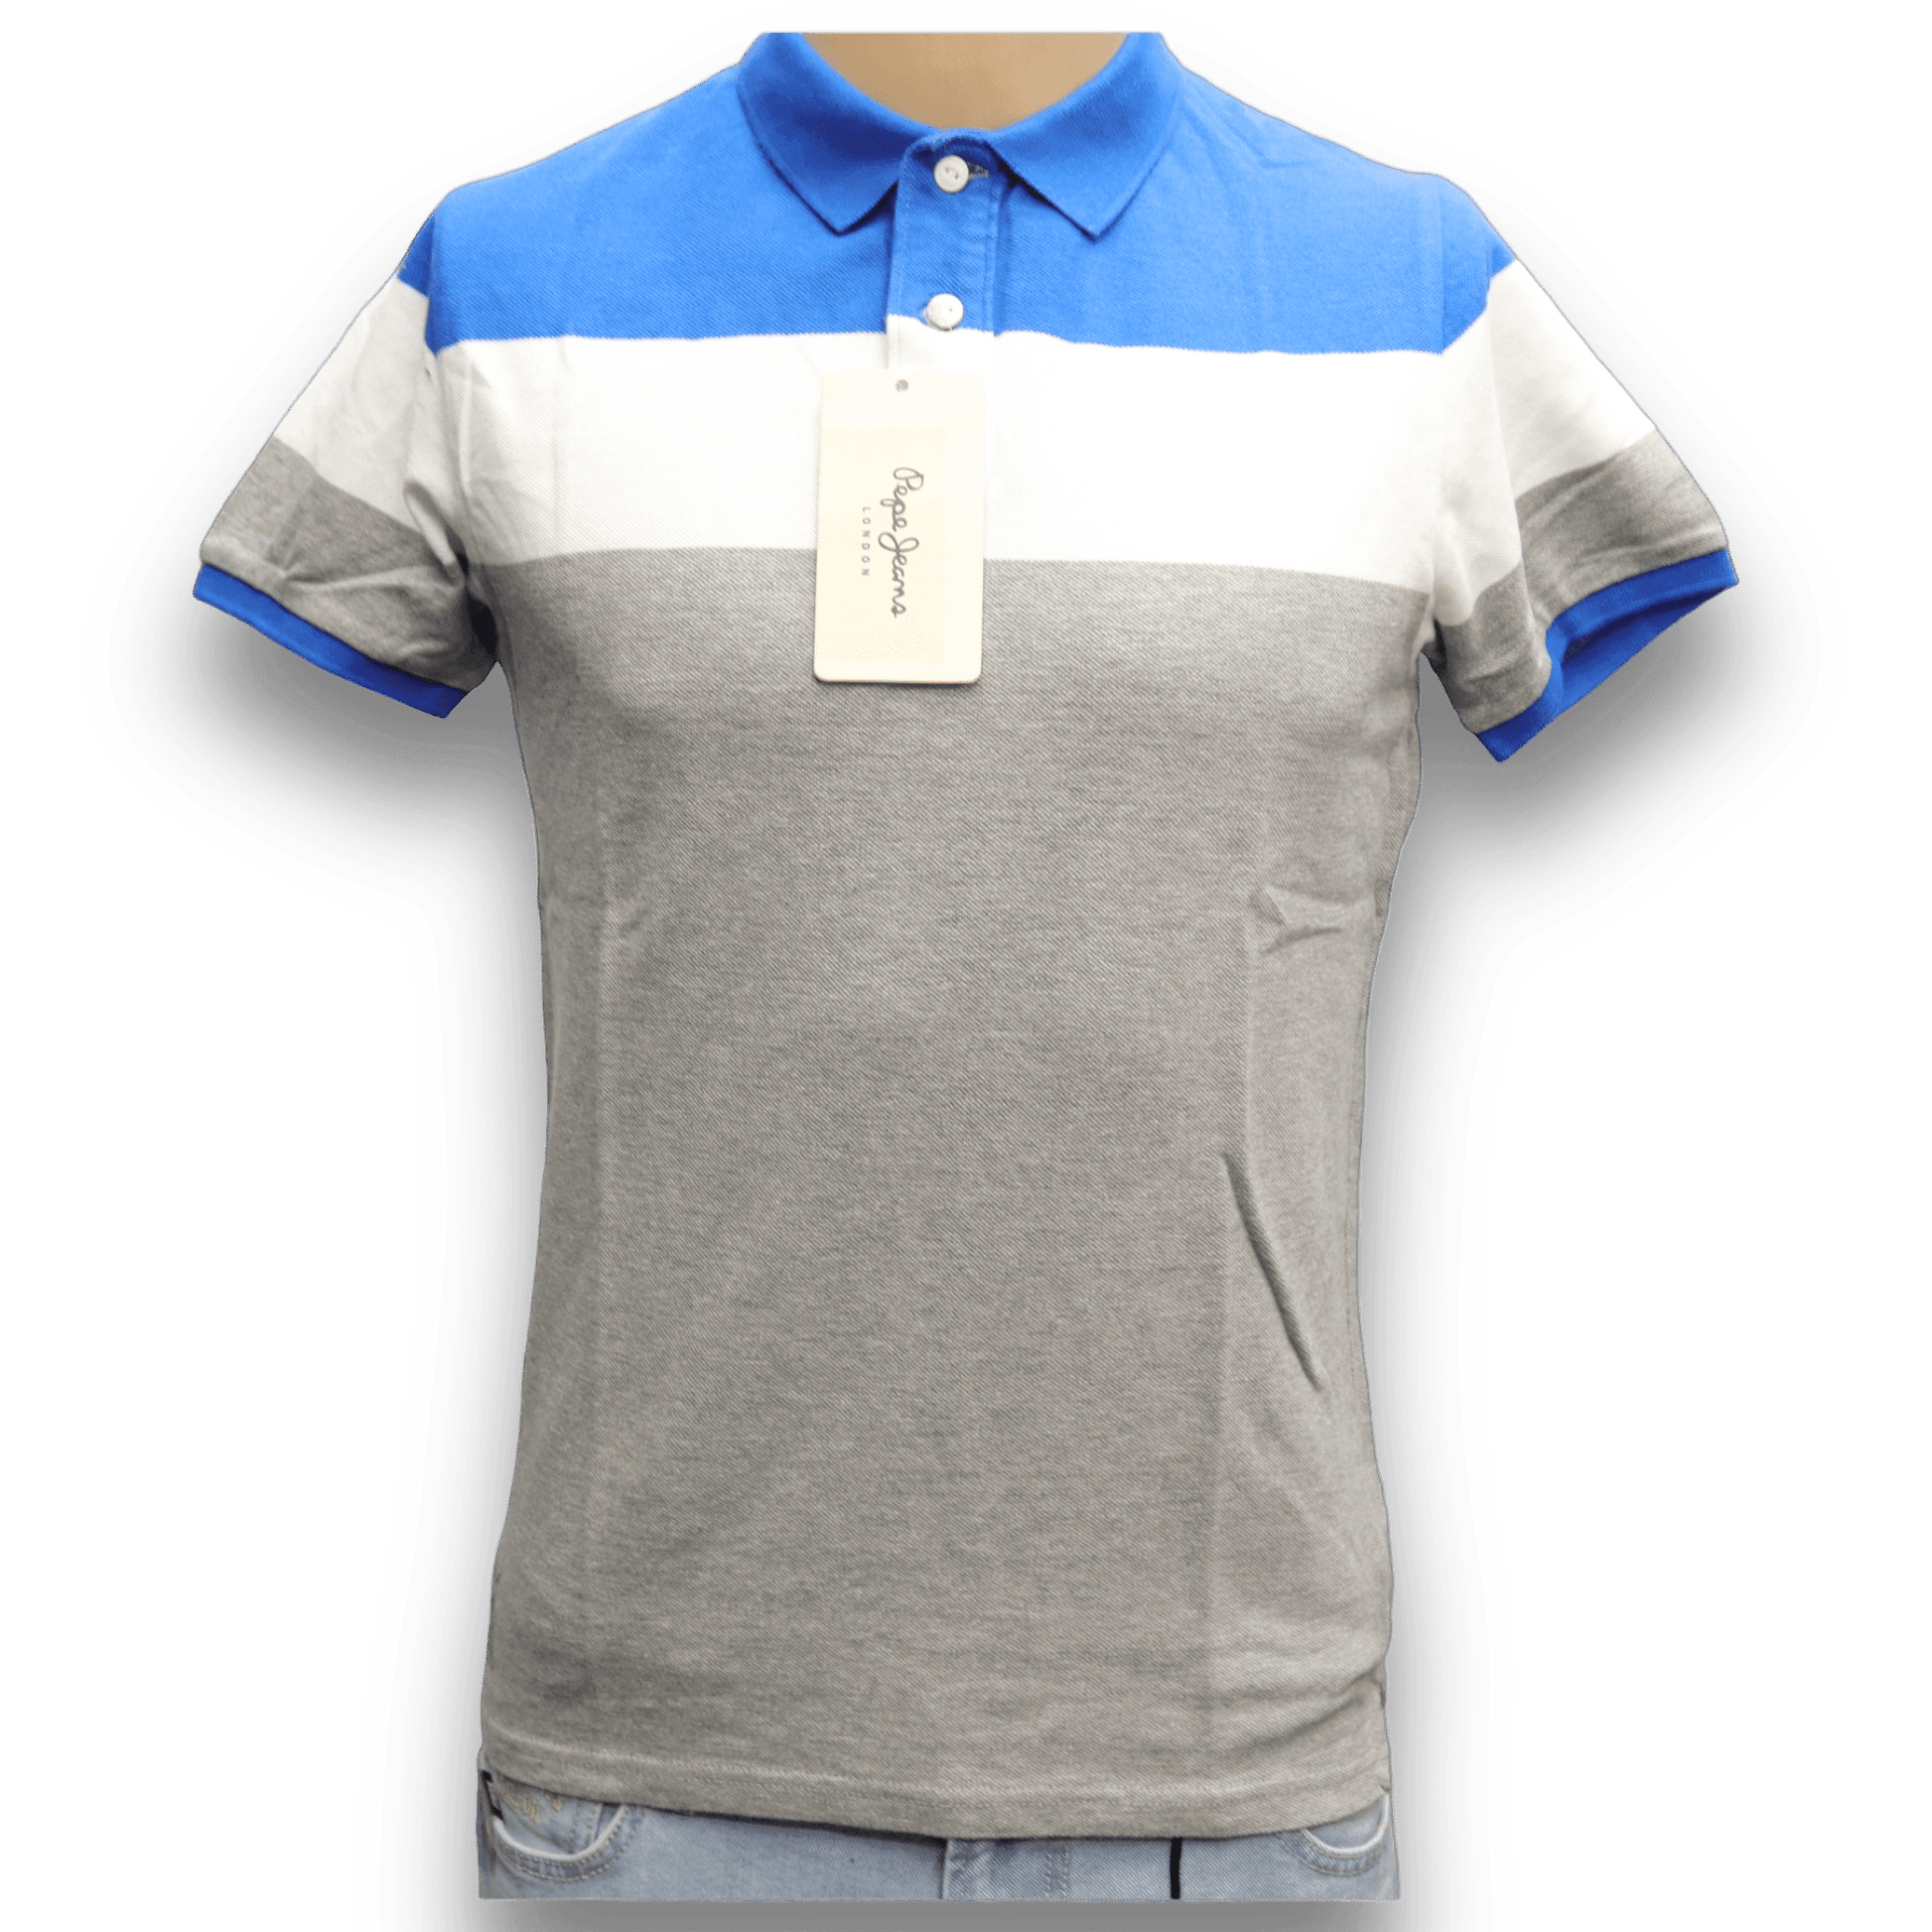 Pepe Jeans Mens Color Polo neck Gray T shirt - Apparel For Less